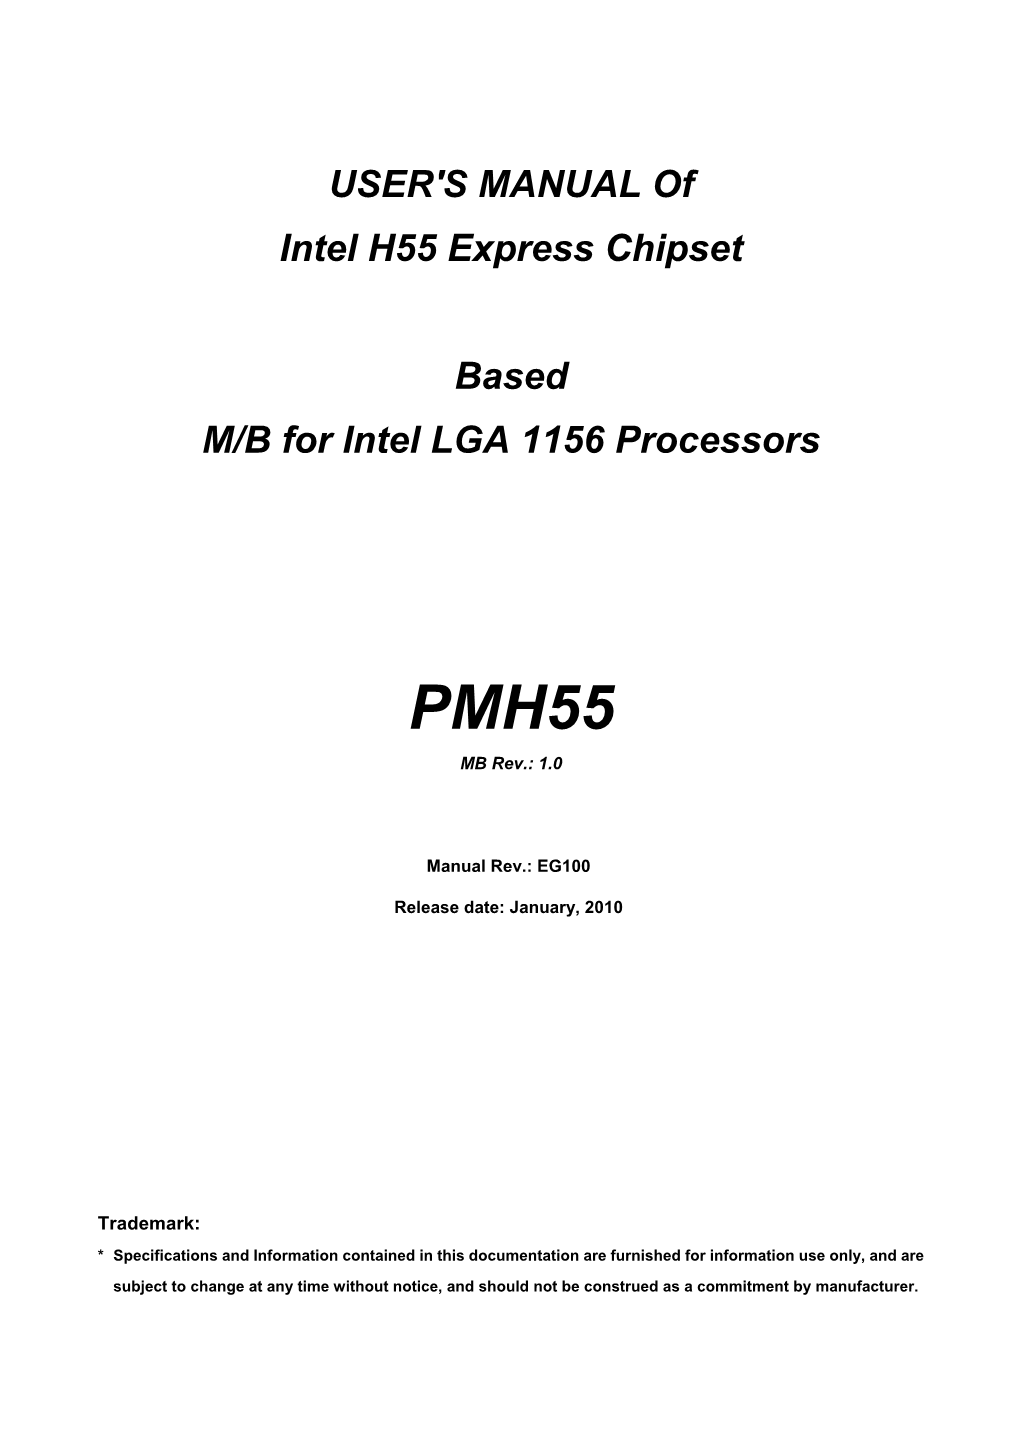 USER's MANUAL of Intel H55 Express Chipset Based M/B for Intel